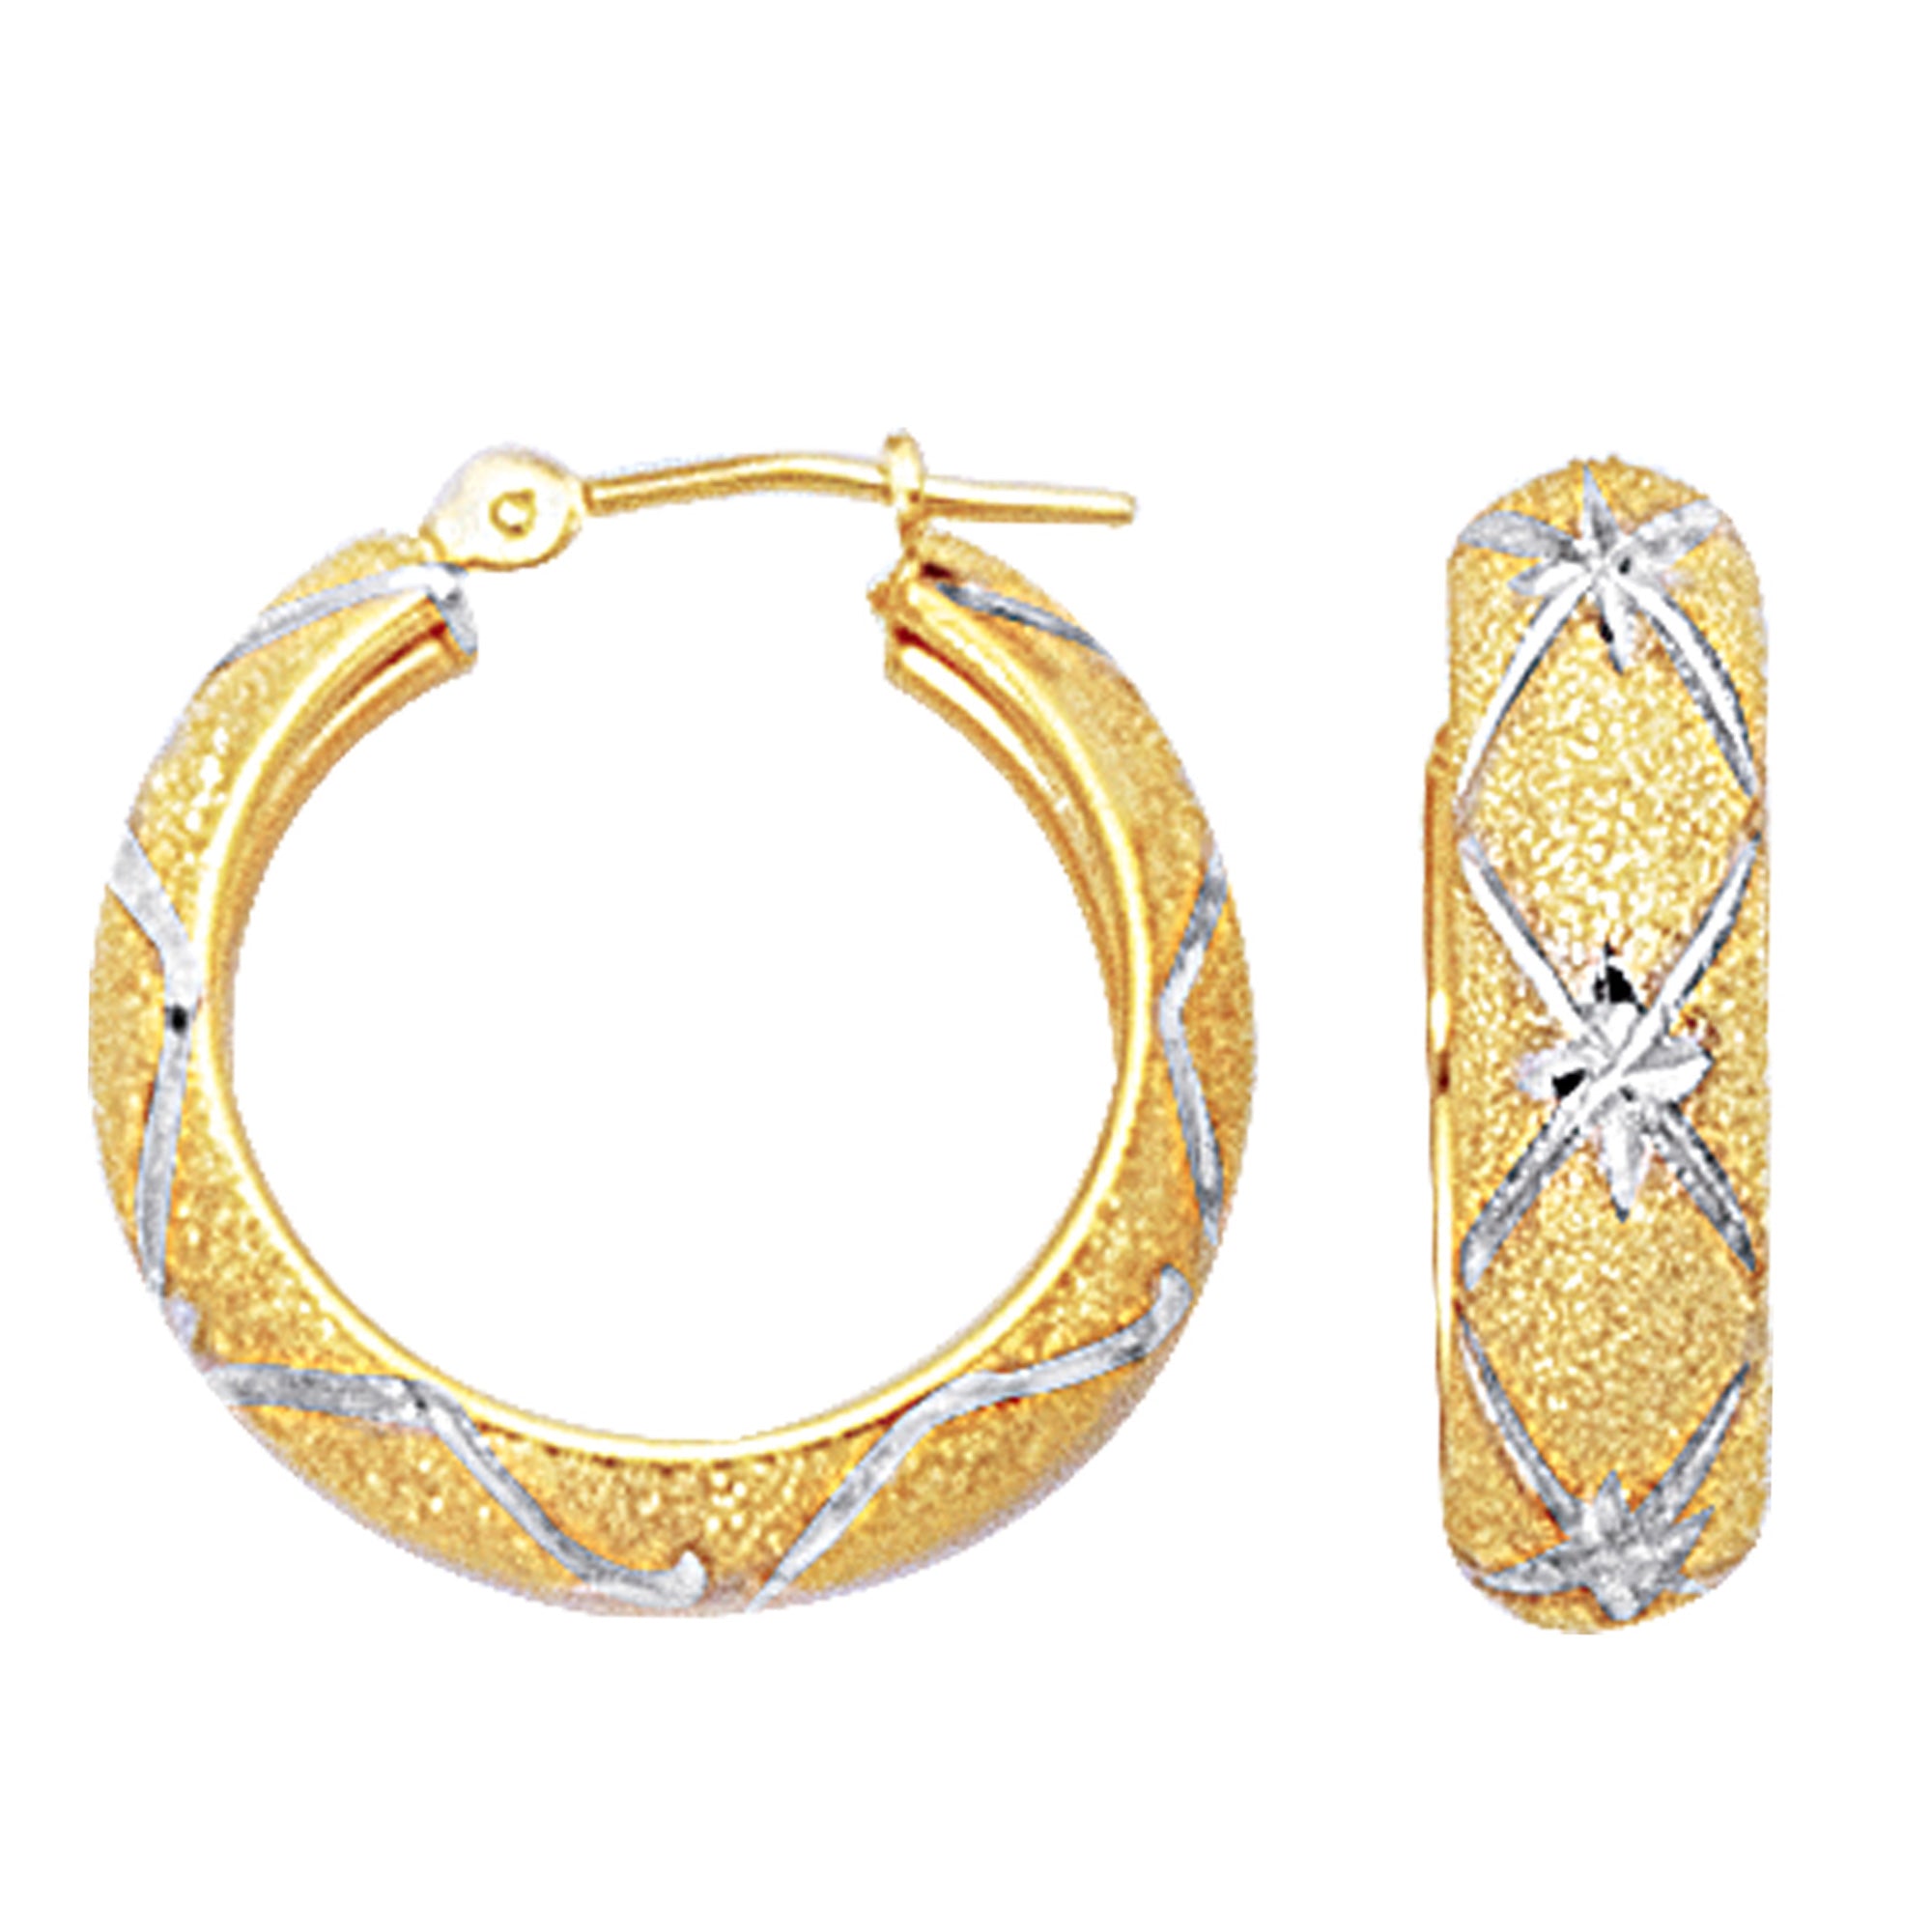 10k 2 Tone White And Yellow Gold Diamond Cut Textured Round Hoop Earrings, Diameter 22mm fine designer jewelry for men and women